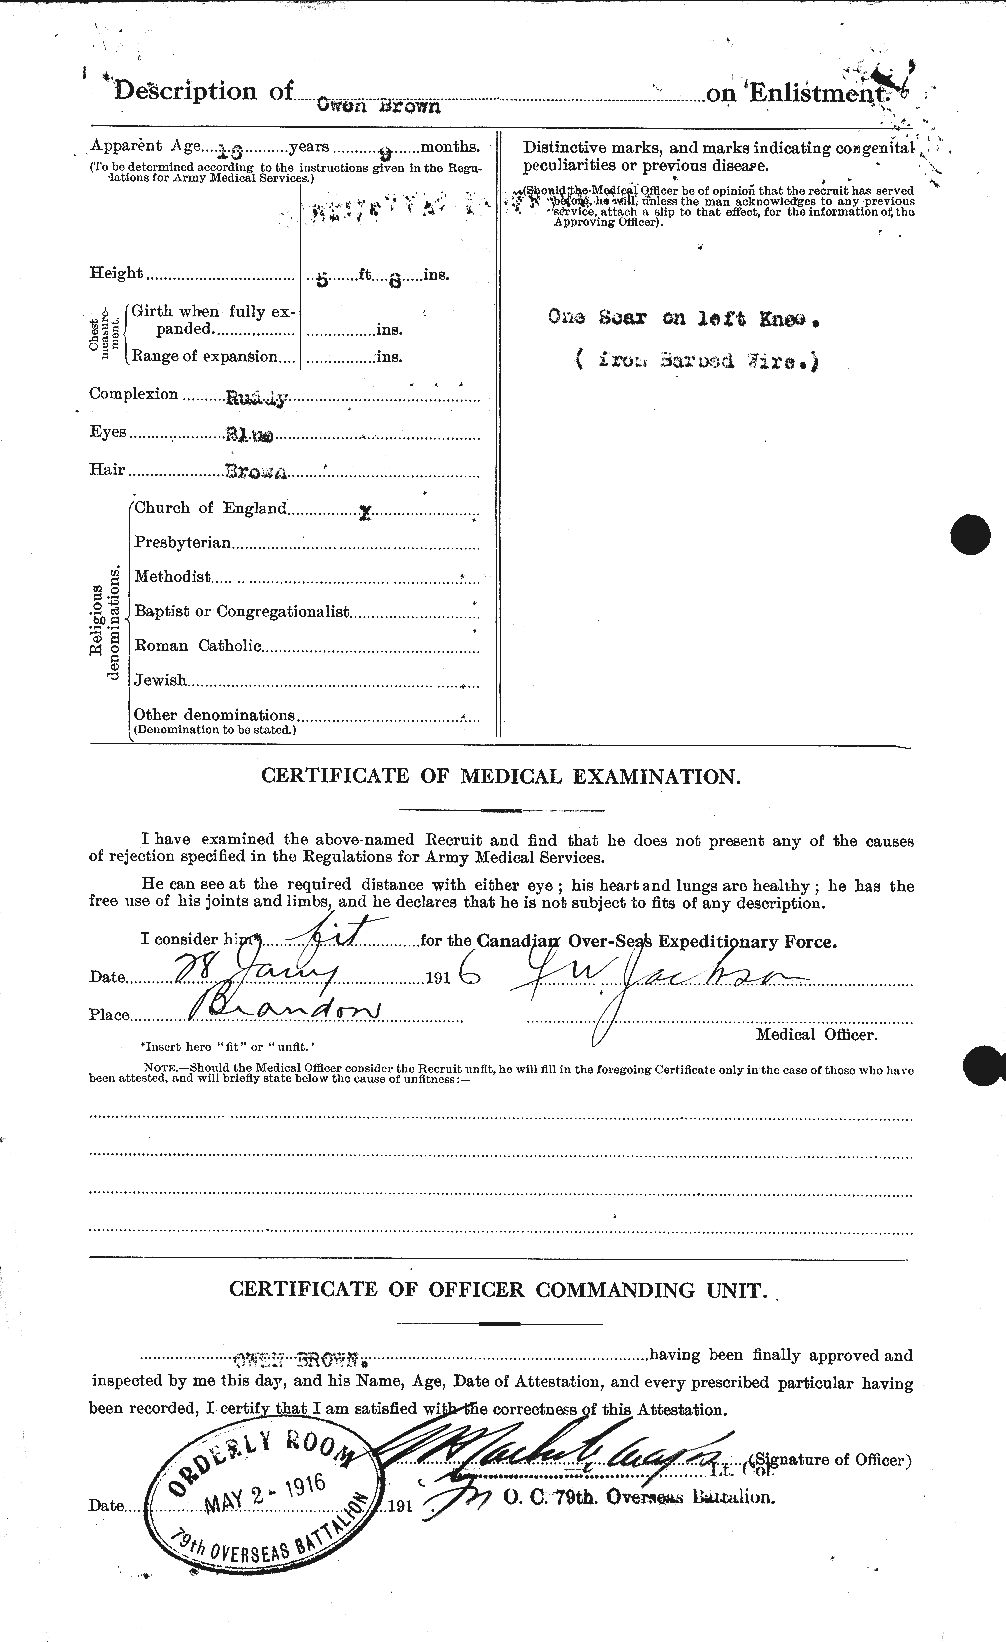 Personnel Records of the First World War - CEF 267148b